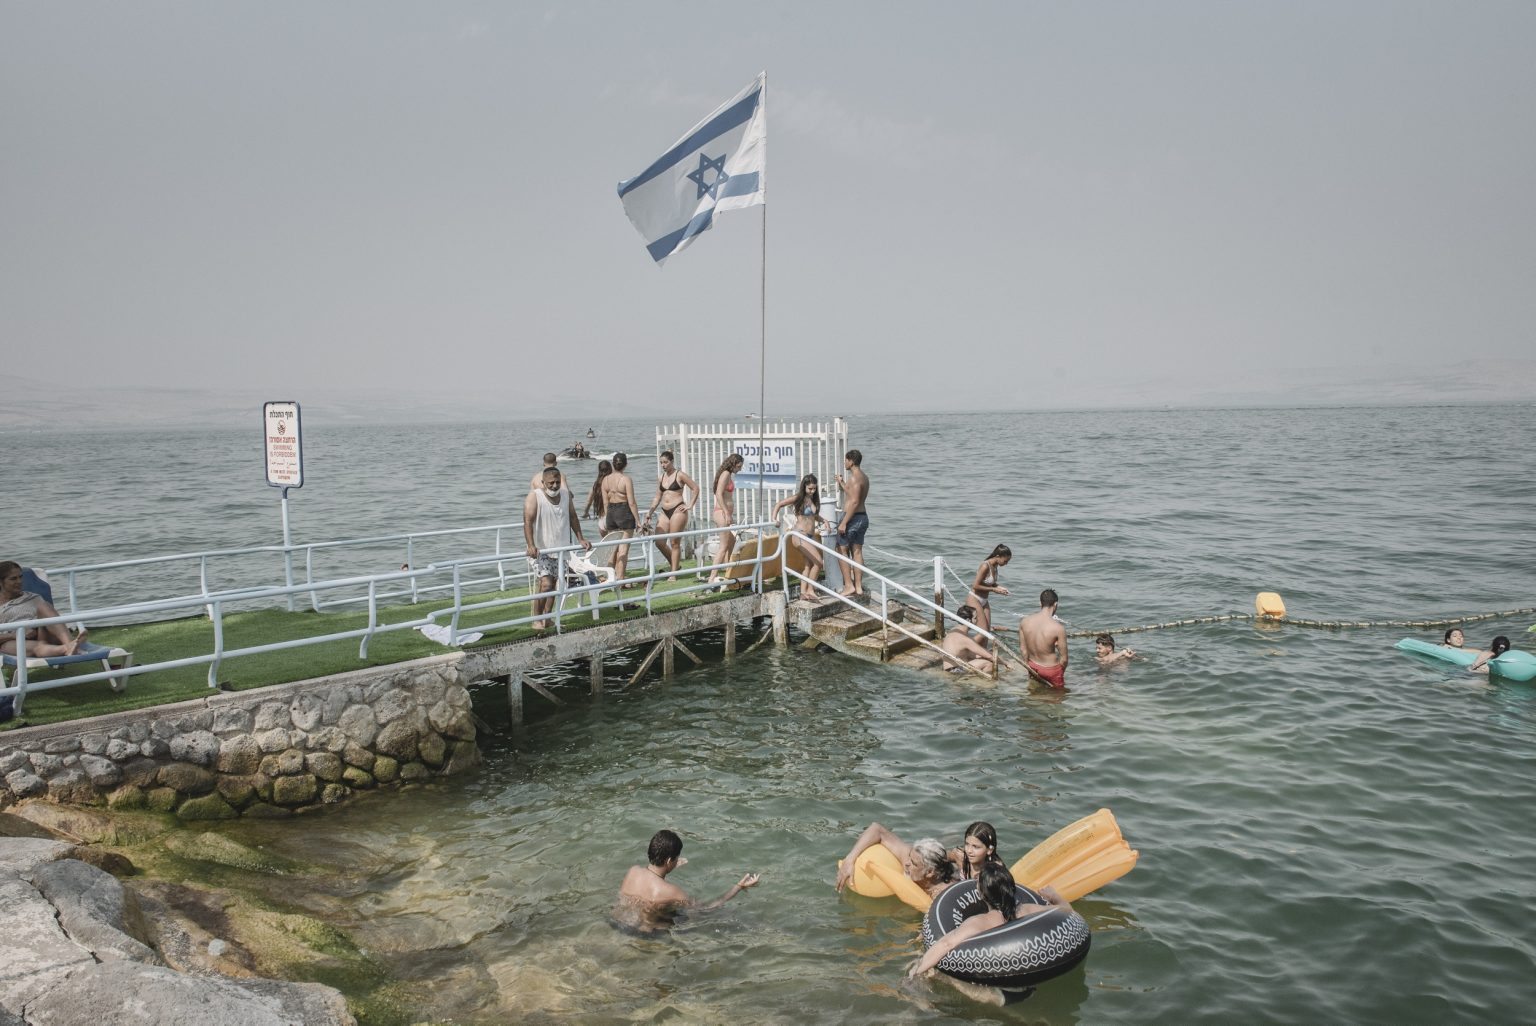 16.15604521 Tourists in the Sea of Galilee in Tiberias, Israel, Aug. 27, 2021.  Two journalists for The New York Times drove the length of Israel to discover what it means to be Israeli today. They met a kaleidoscope of people, searching for belonging but far apart on how to find it. (Laetitia Vancon/The New York Times)     <span style="color: #ff0000">*** SPECIAL   FEE   APPLIES ***</span> *** Local Caption *** 16.15604521